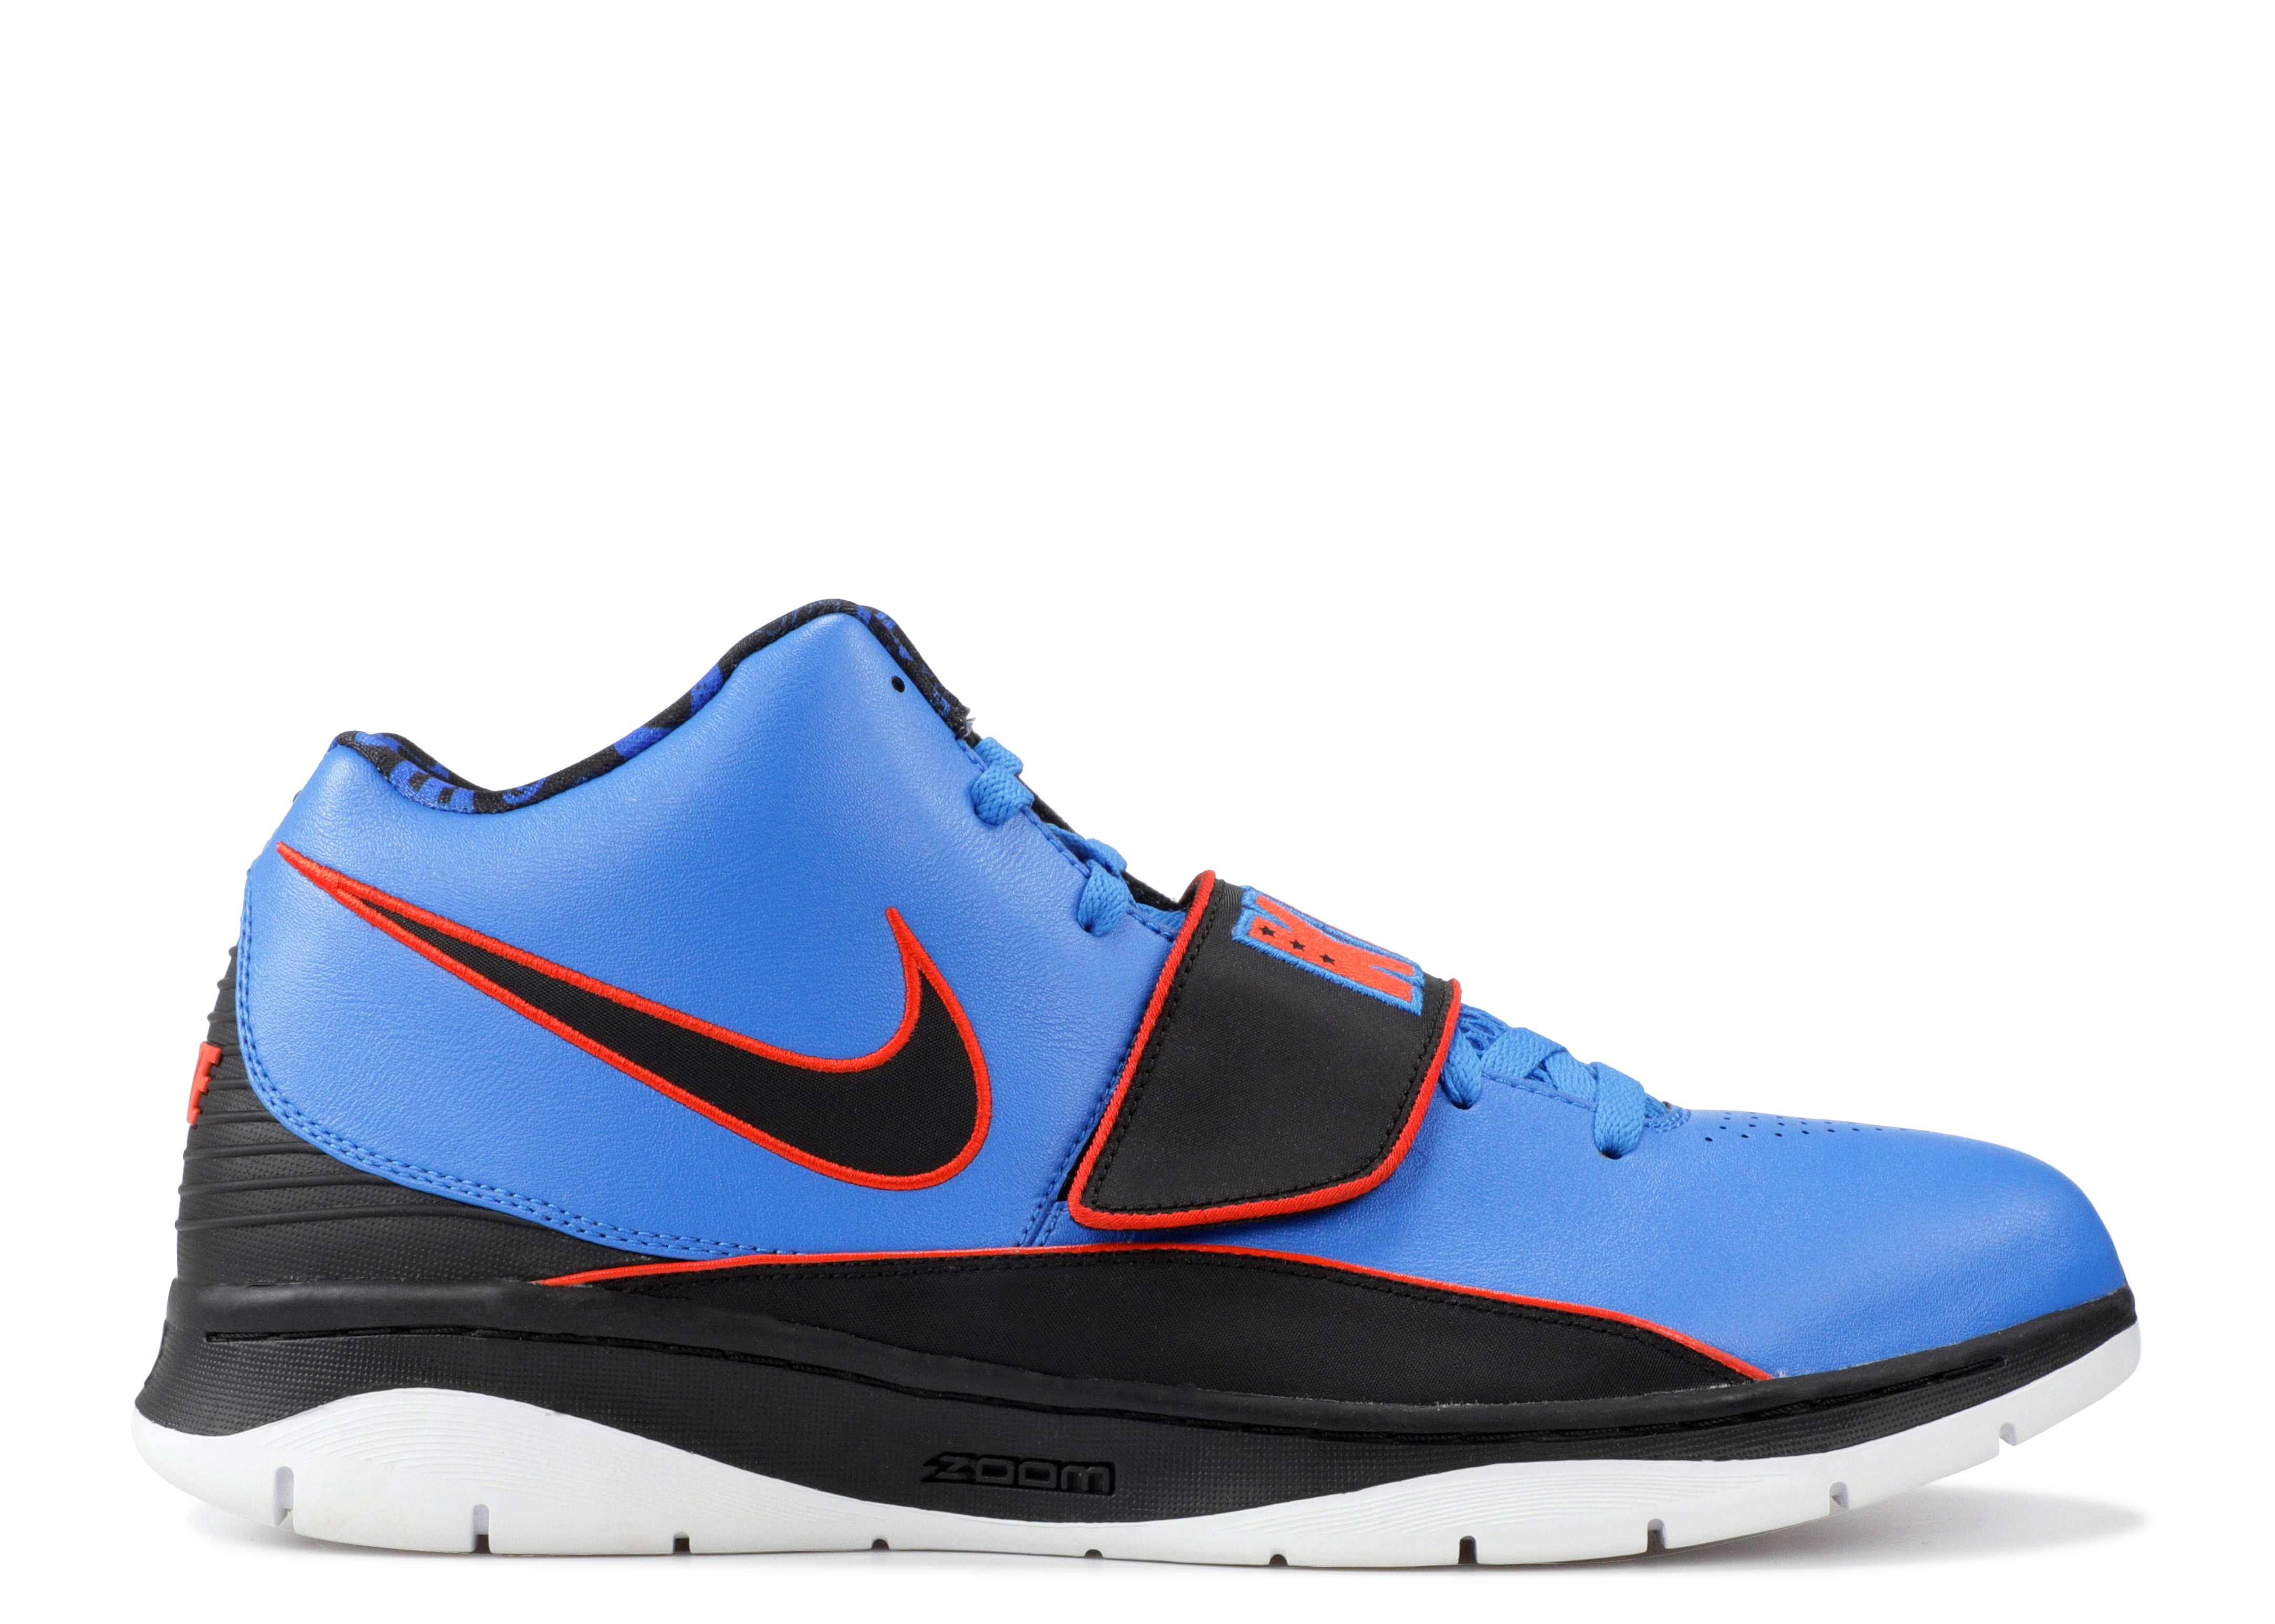 kd 2 Kevin Durant shoes on sale